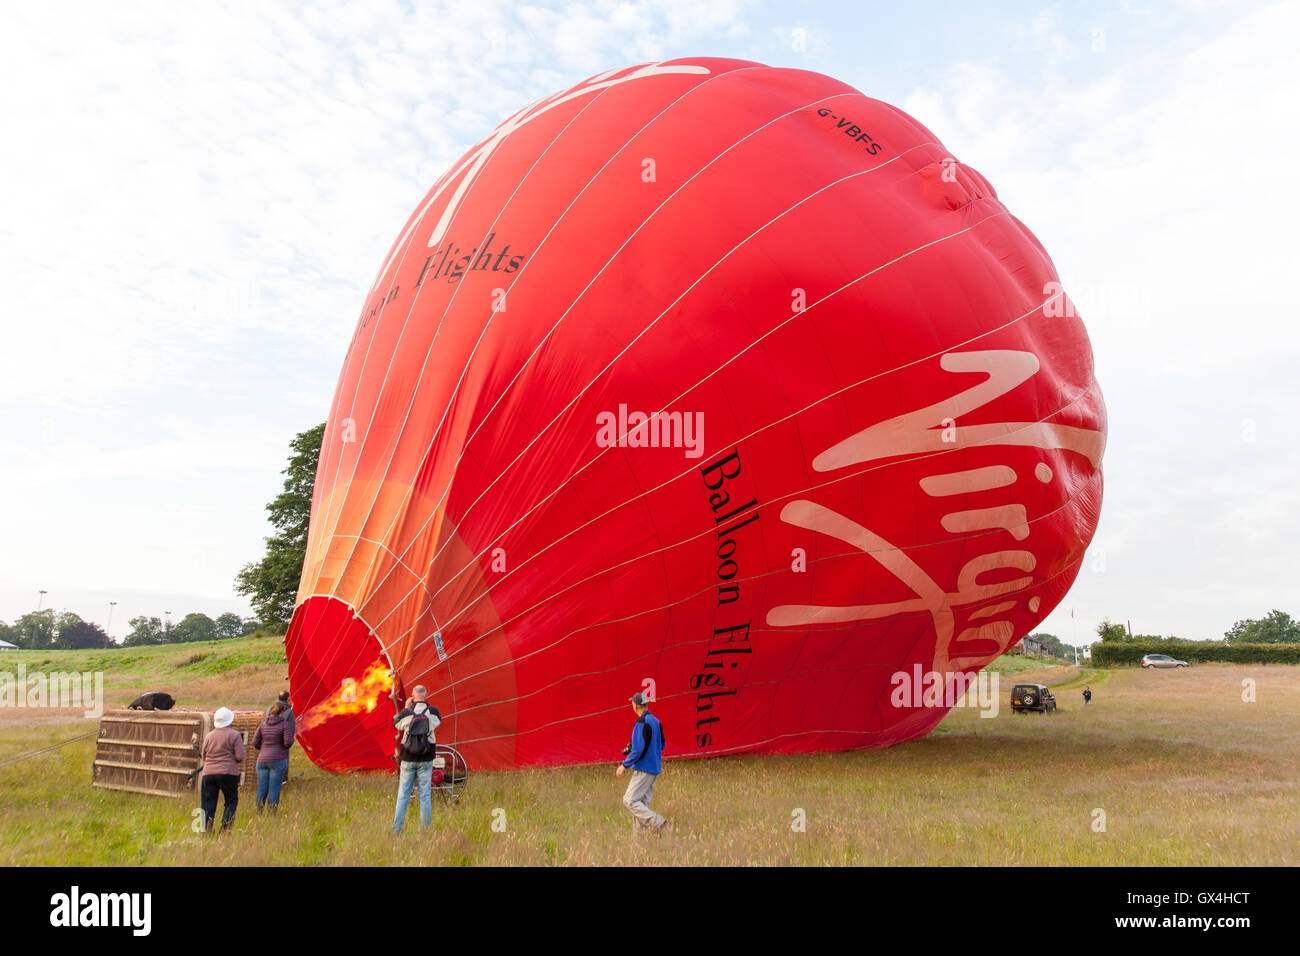 Red Virgin hot air balloon being inflated Stock Photo